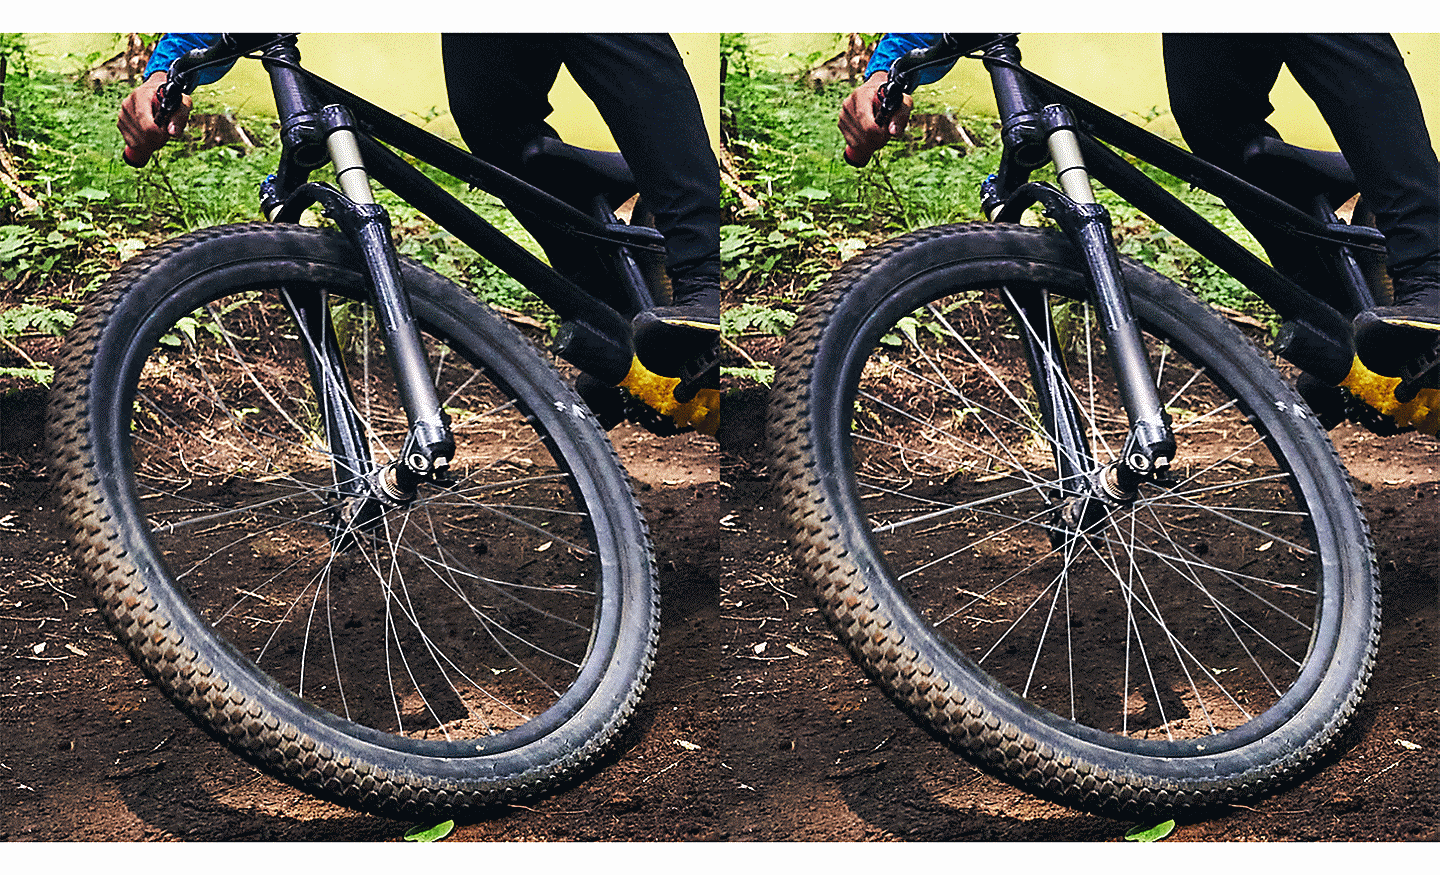 Two images of a mountain bike wheel, one with distorted spokes, one without.